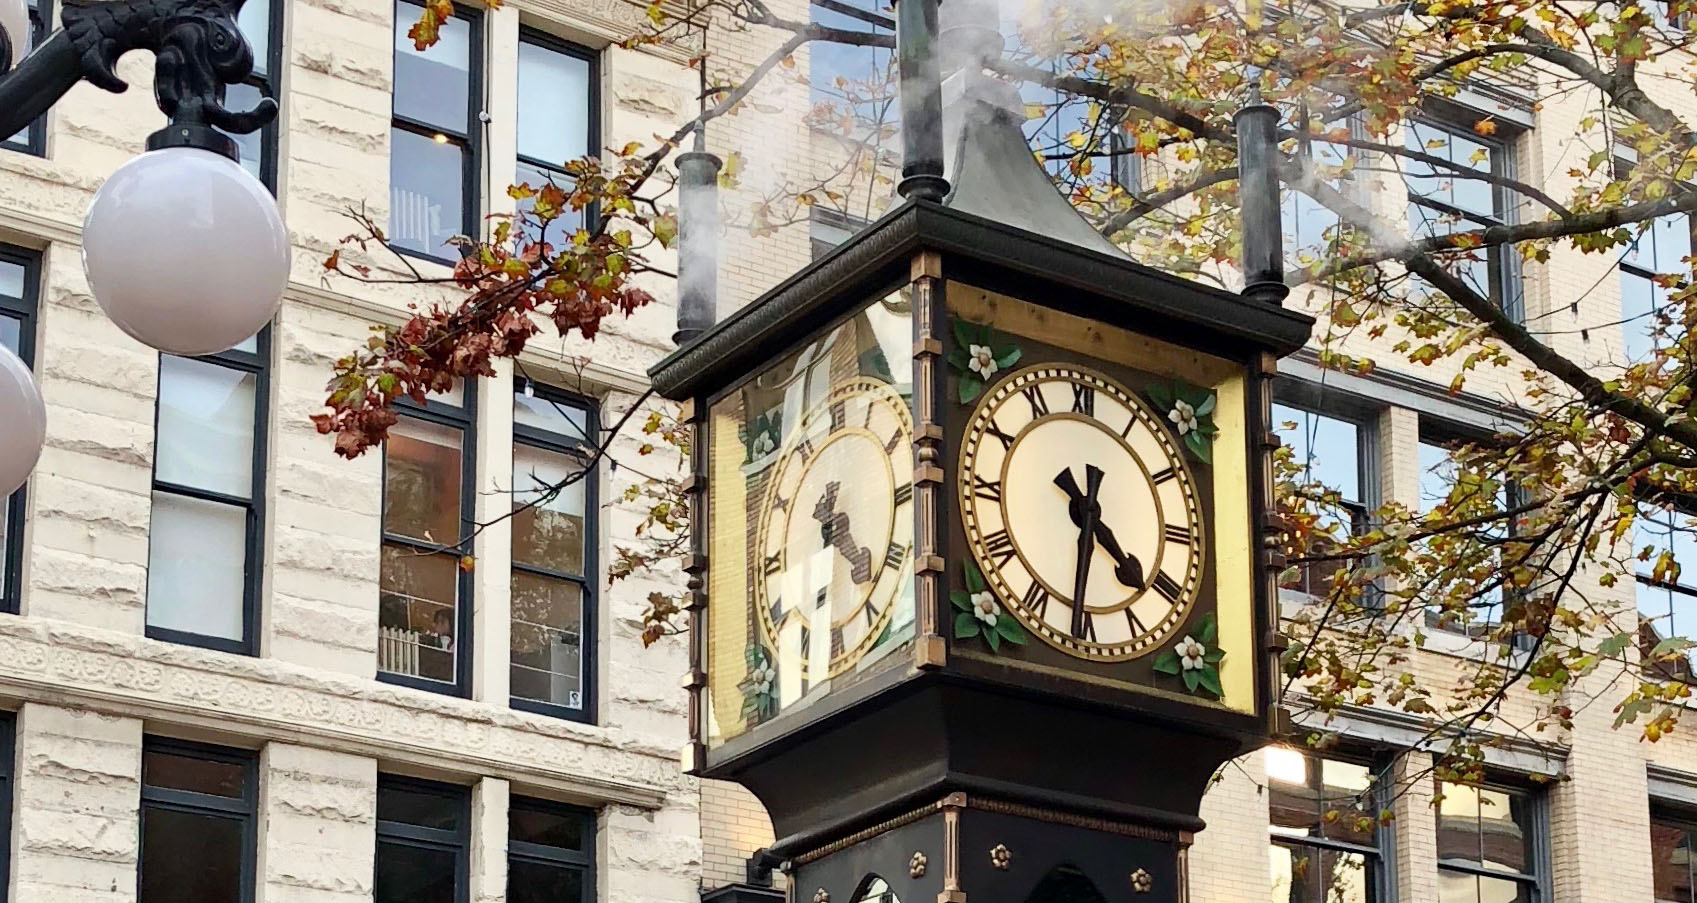 The steam clock in Gastown, Downtown Vancouver, Canada